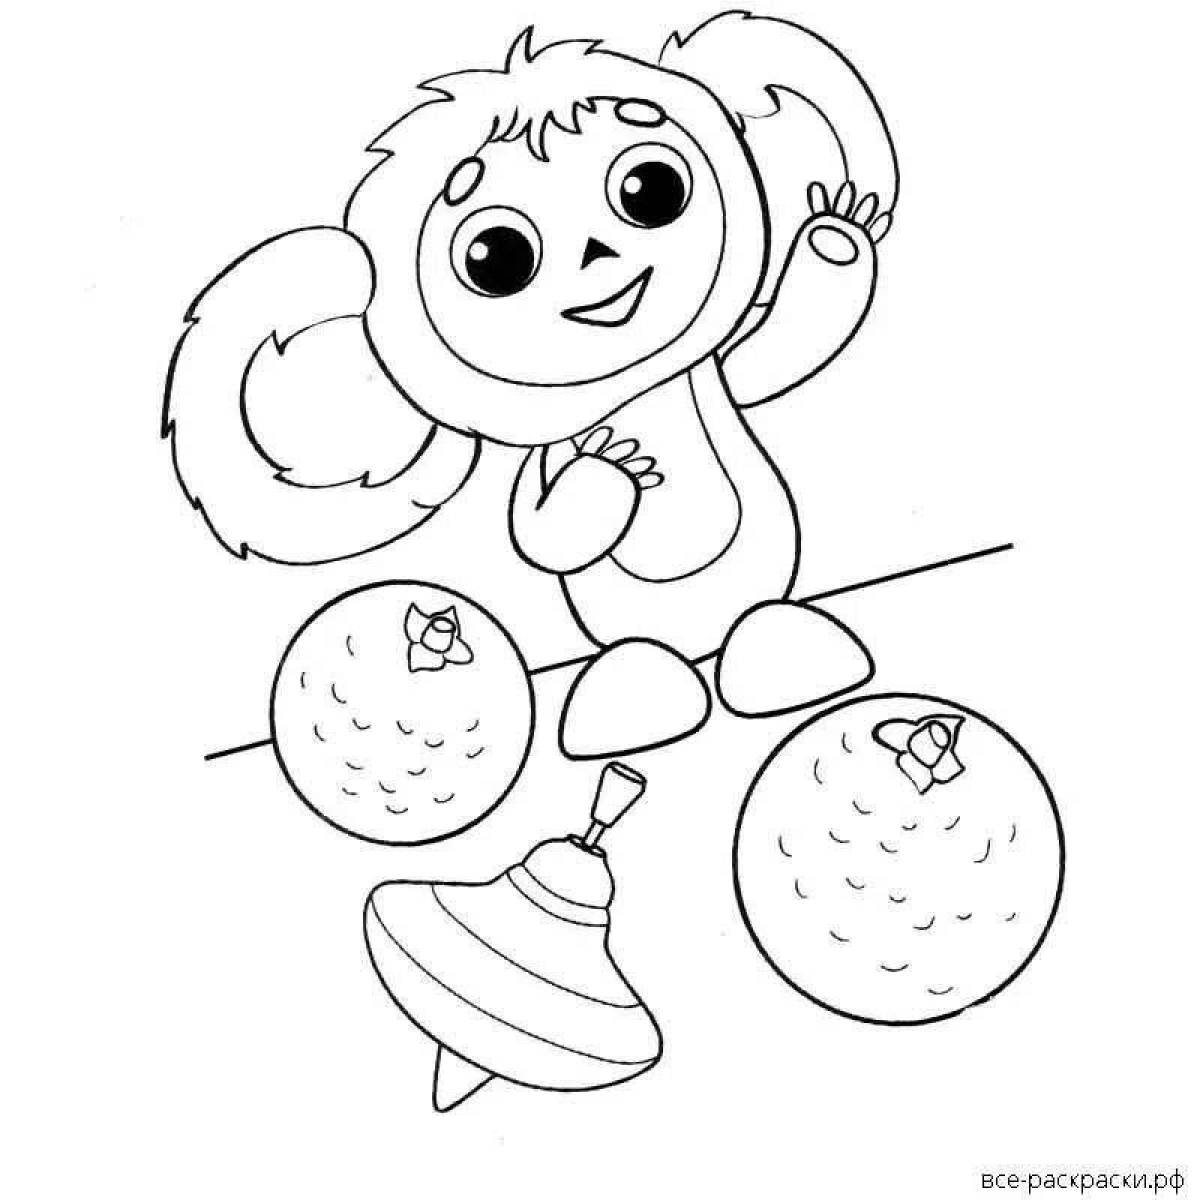 Charming Cheburashka coloring book for children 5-6 years old